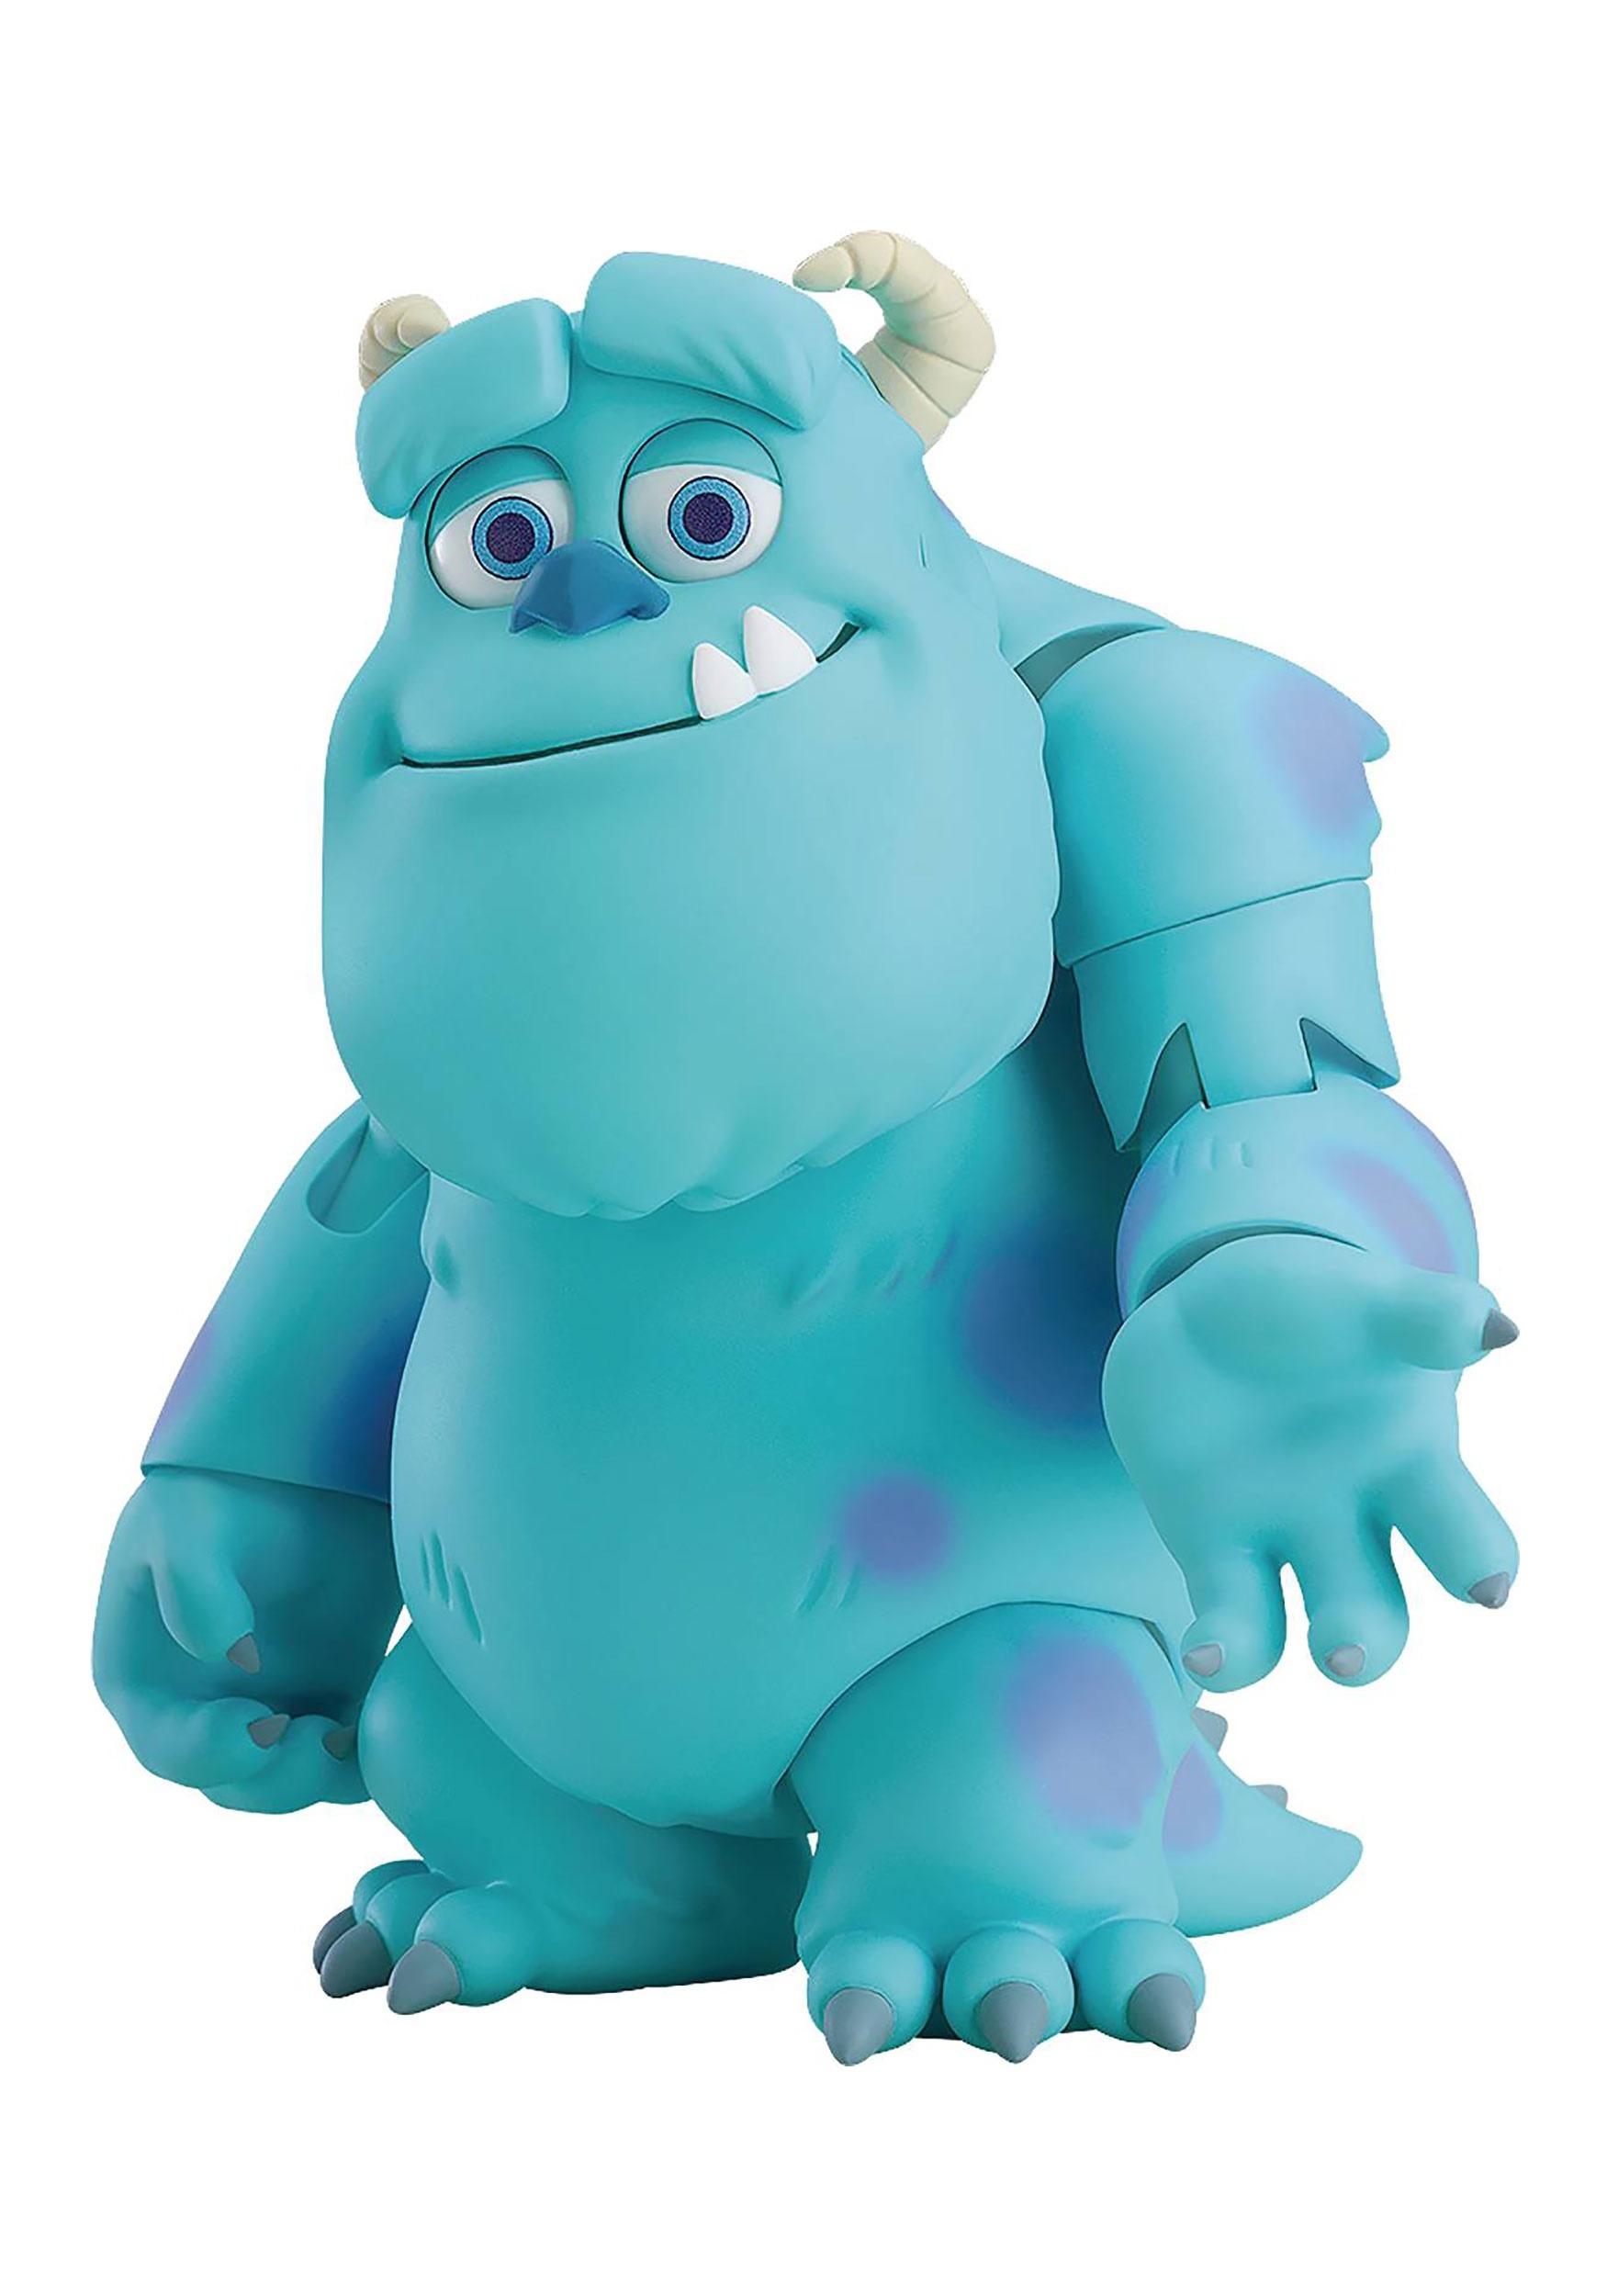 Monsters Inc Sully Nendoroid Action Figure Deluxe